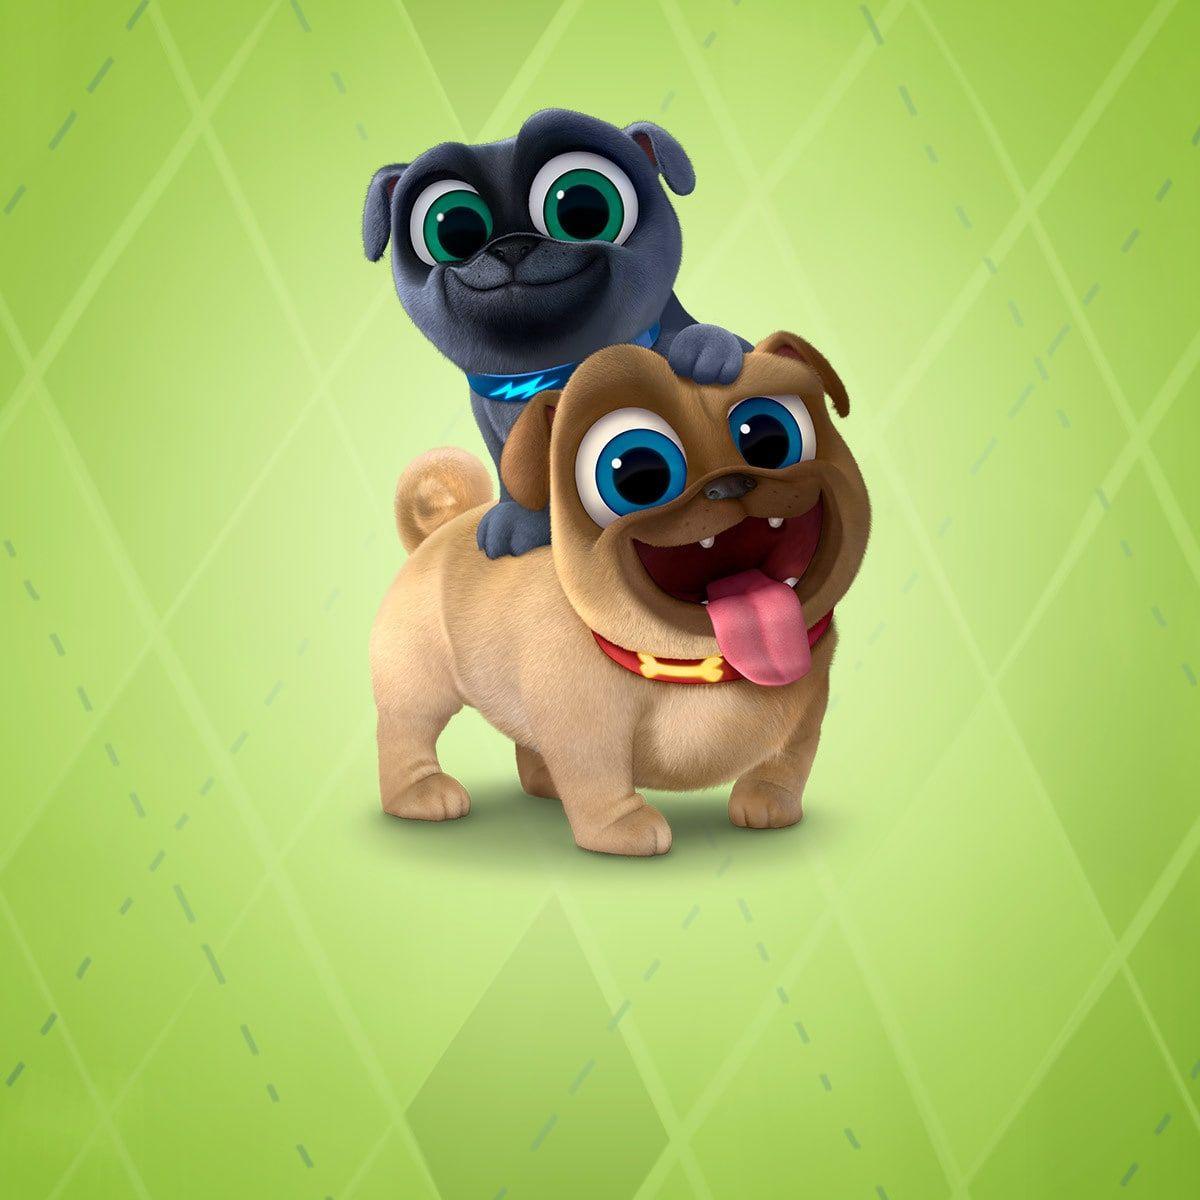 Puppy Dog Pals Wallpapers - Top Free Puppy Dog Pals Backgrounds - WallpaperAccess